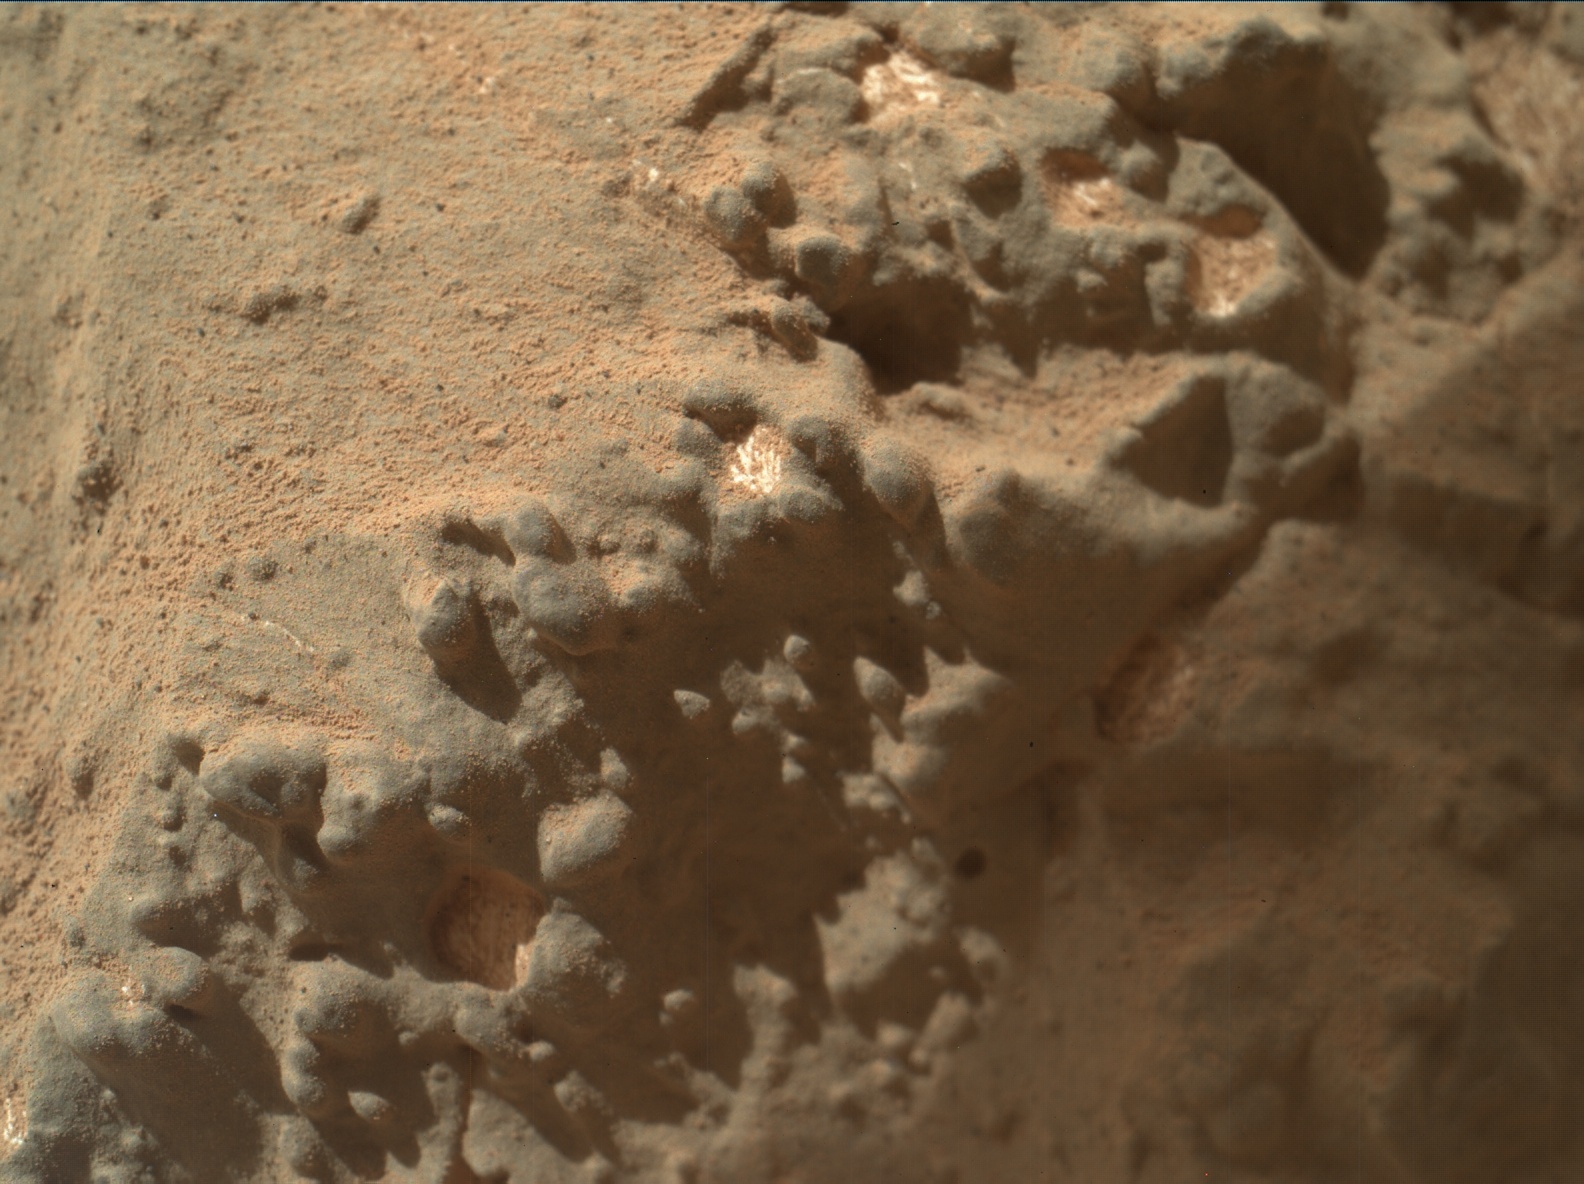 Nasa's Mars rover Curiosity acquired this image using its Mars Hand Lens Imager (MAHLI) on Sol 154